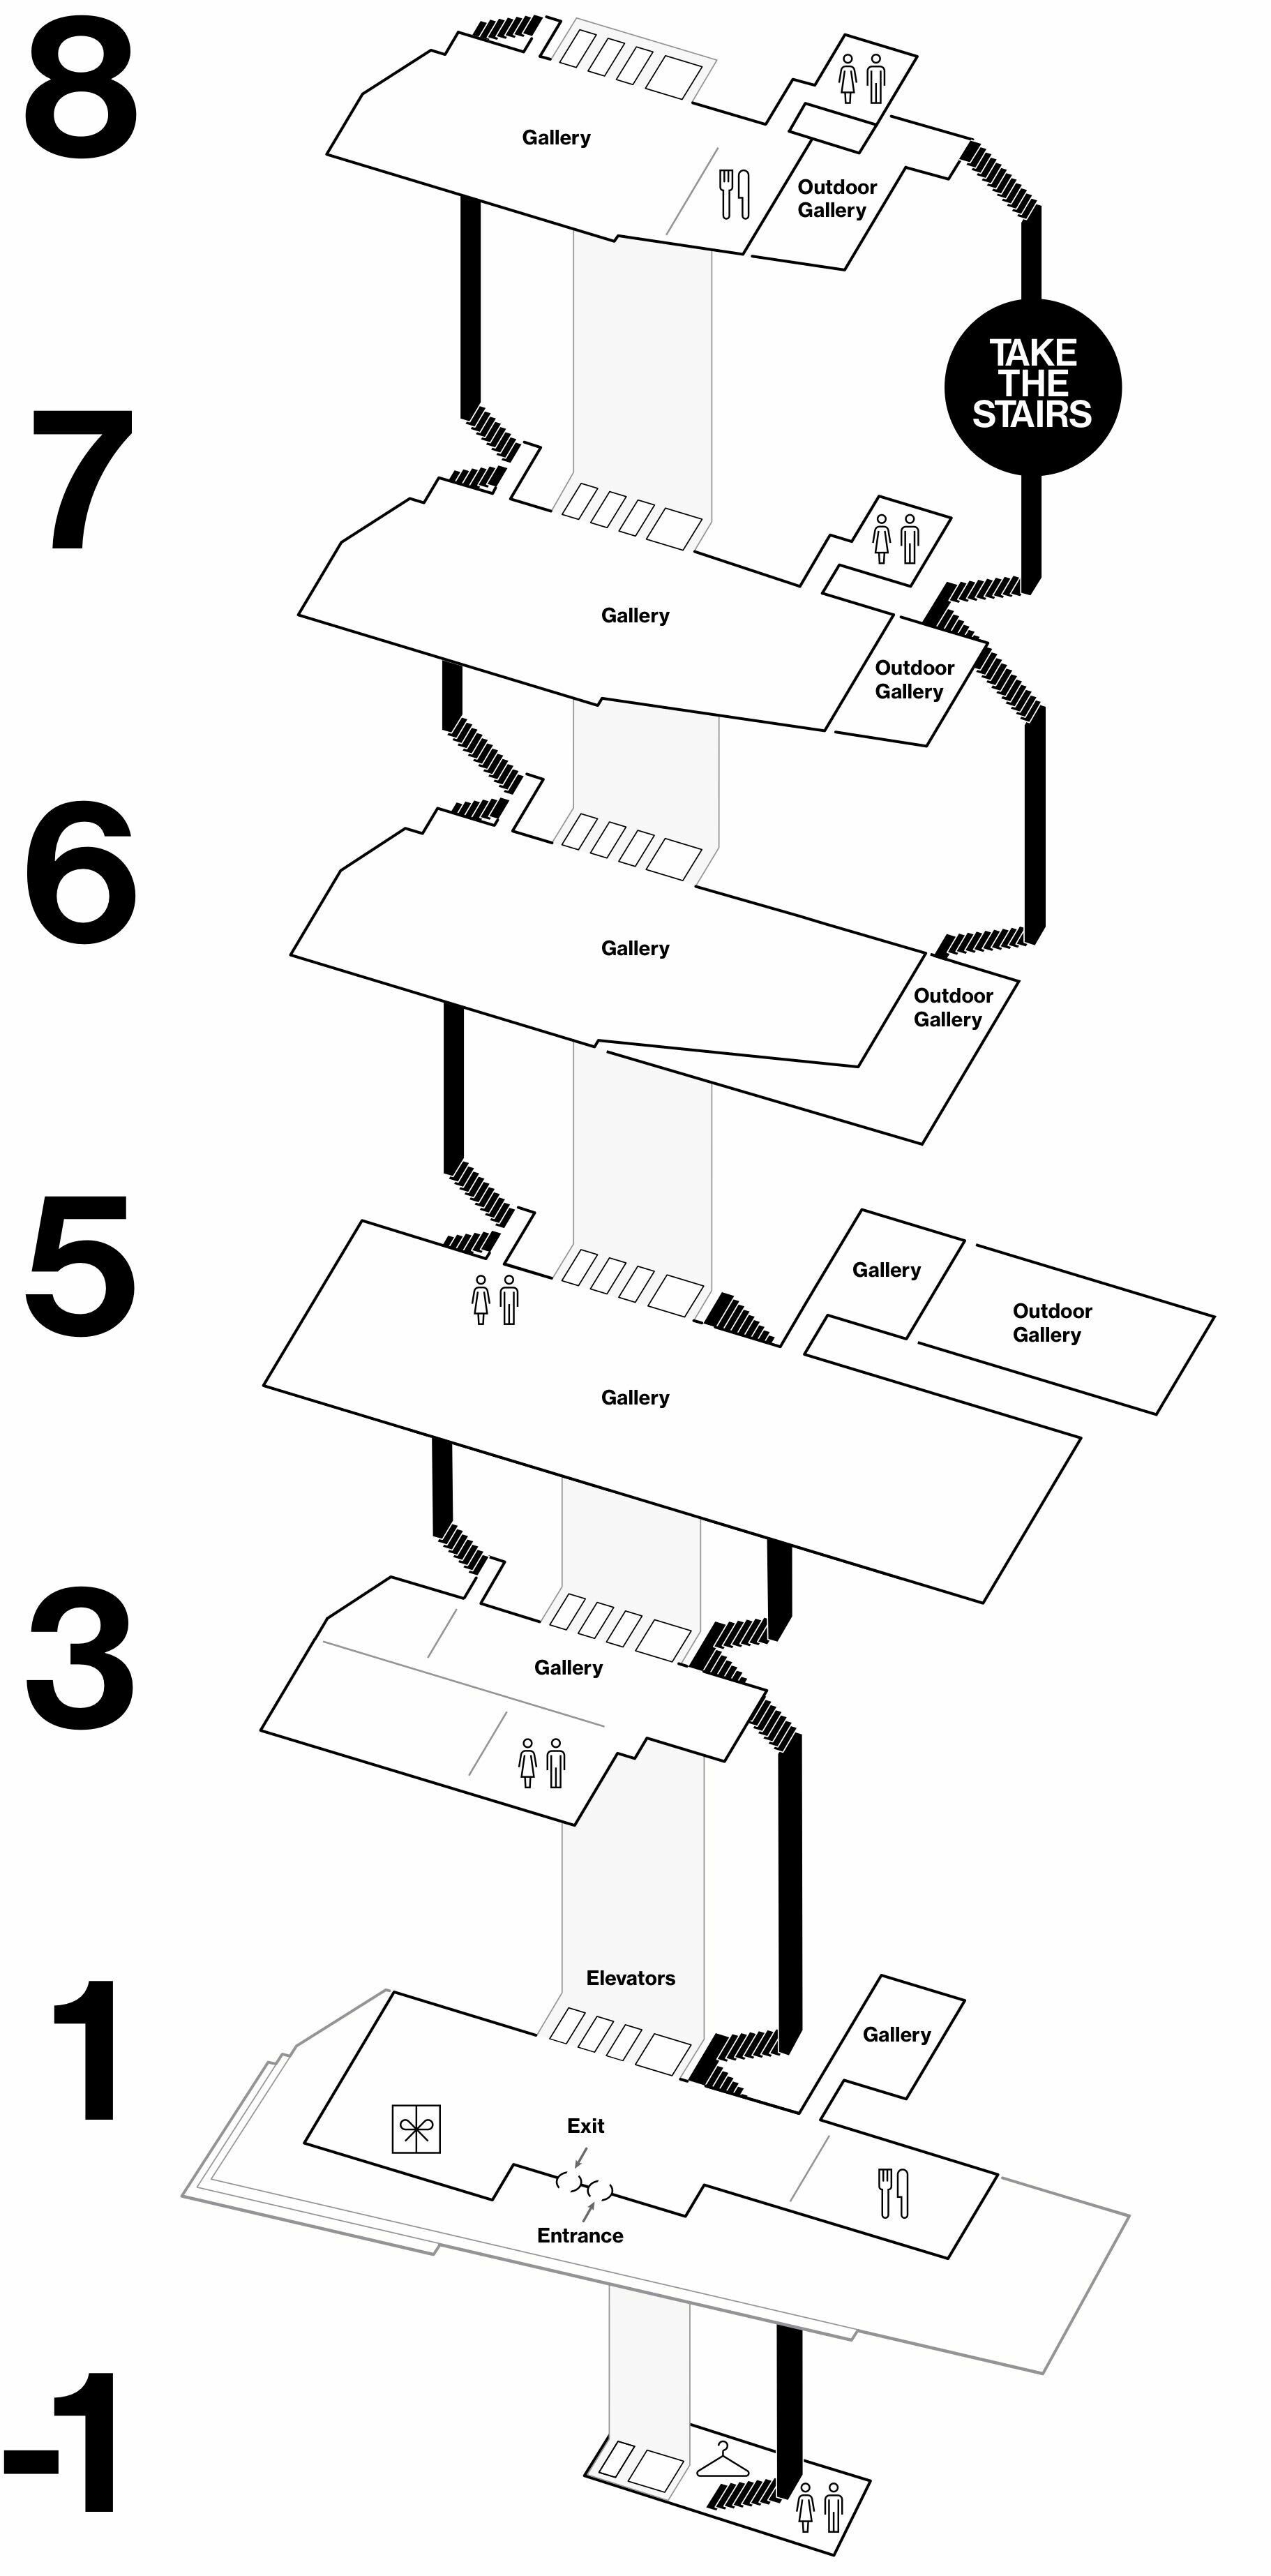 A map displaying all floors of the Whitney Museum. Restrooms are located on Floors: -1, 3, 7, and 8. The lobby and shop are on Floor 1. Galleries are located on Floors: 3, 5, 6, 7, and 8.